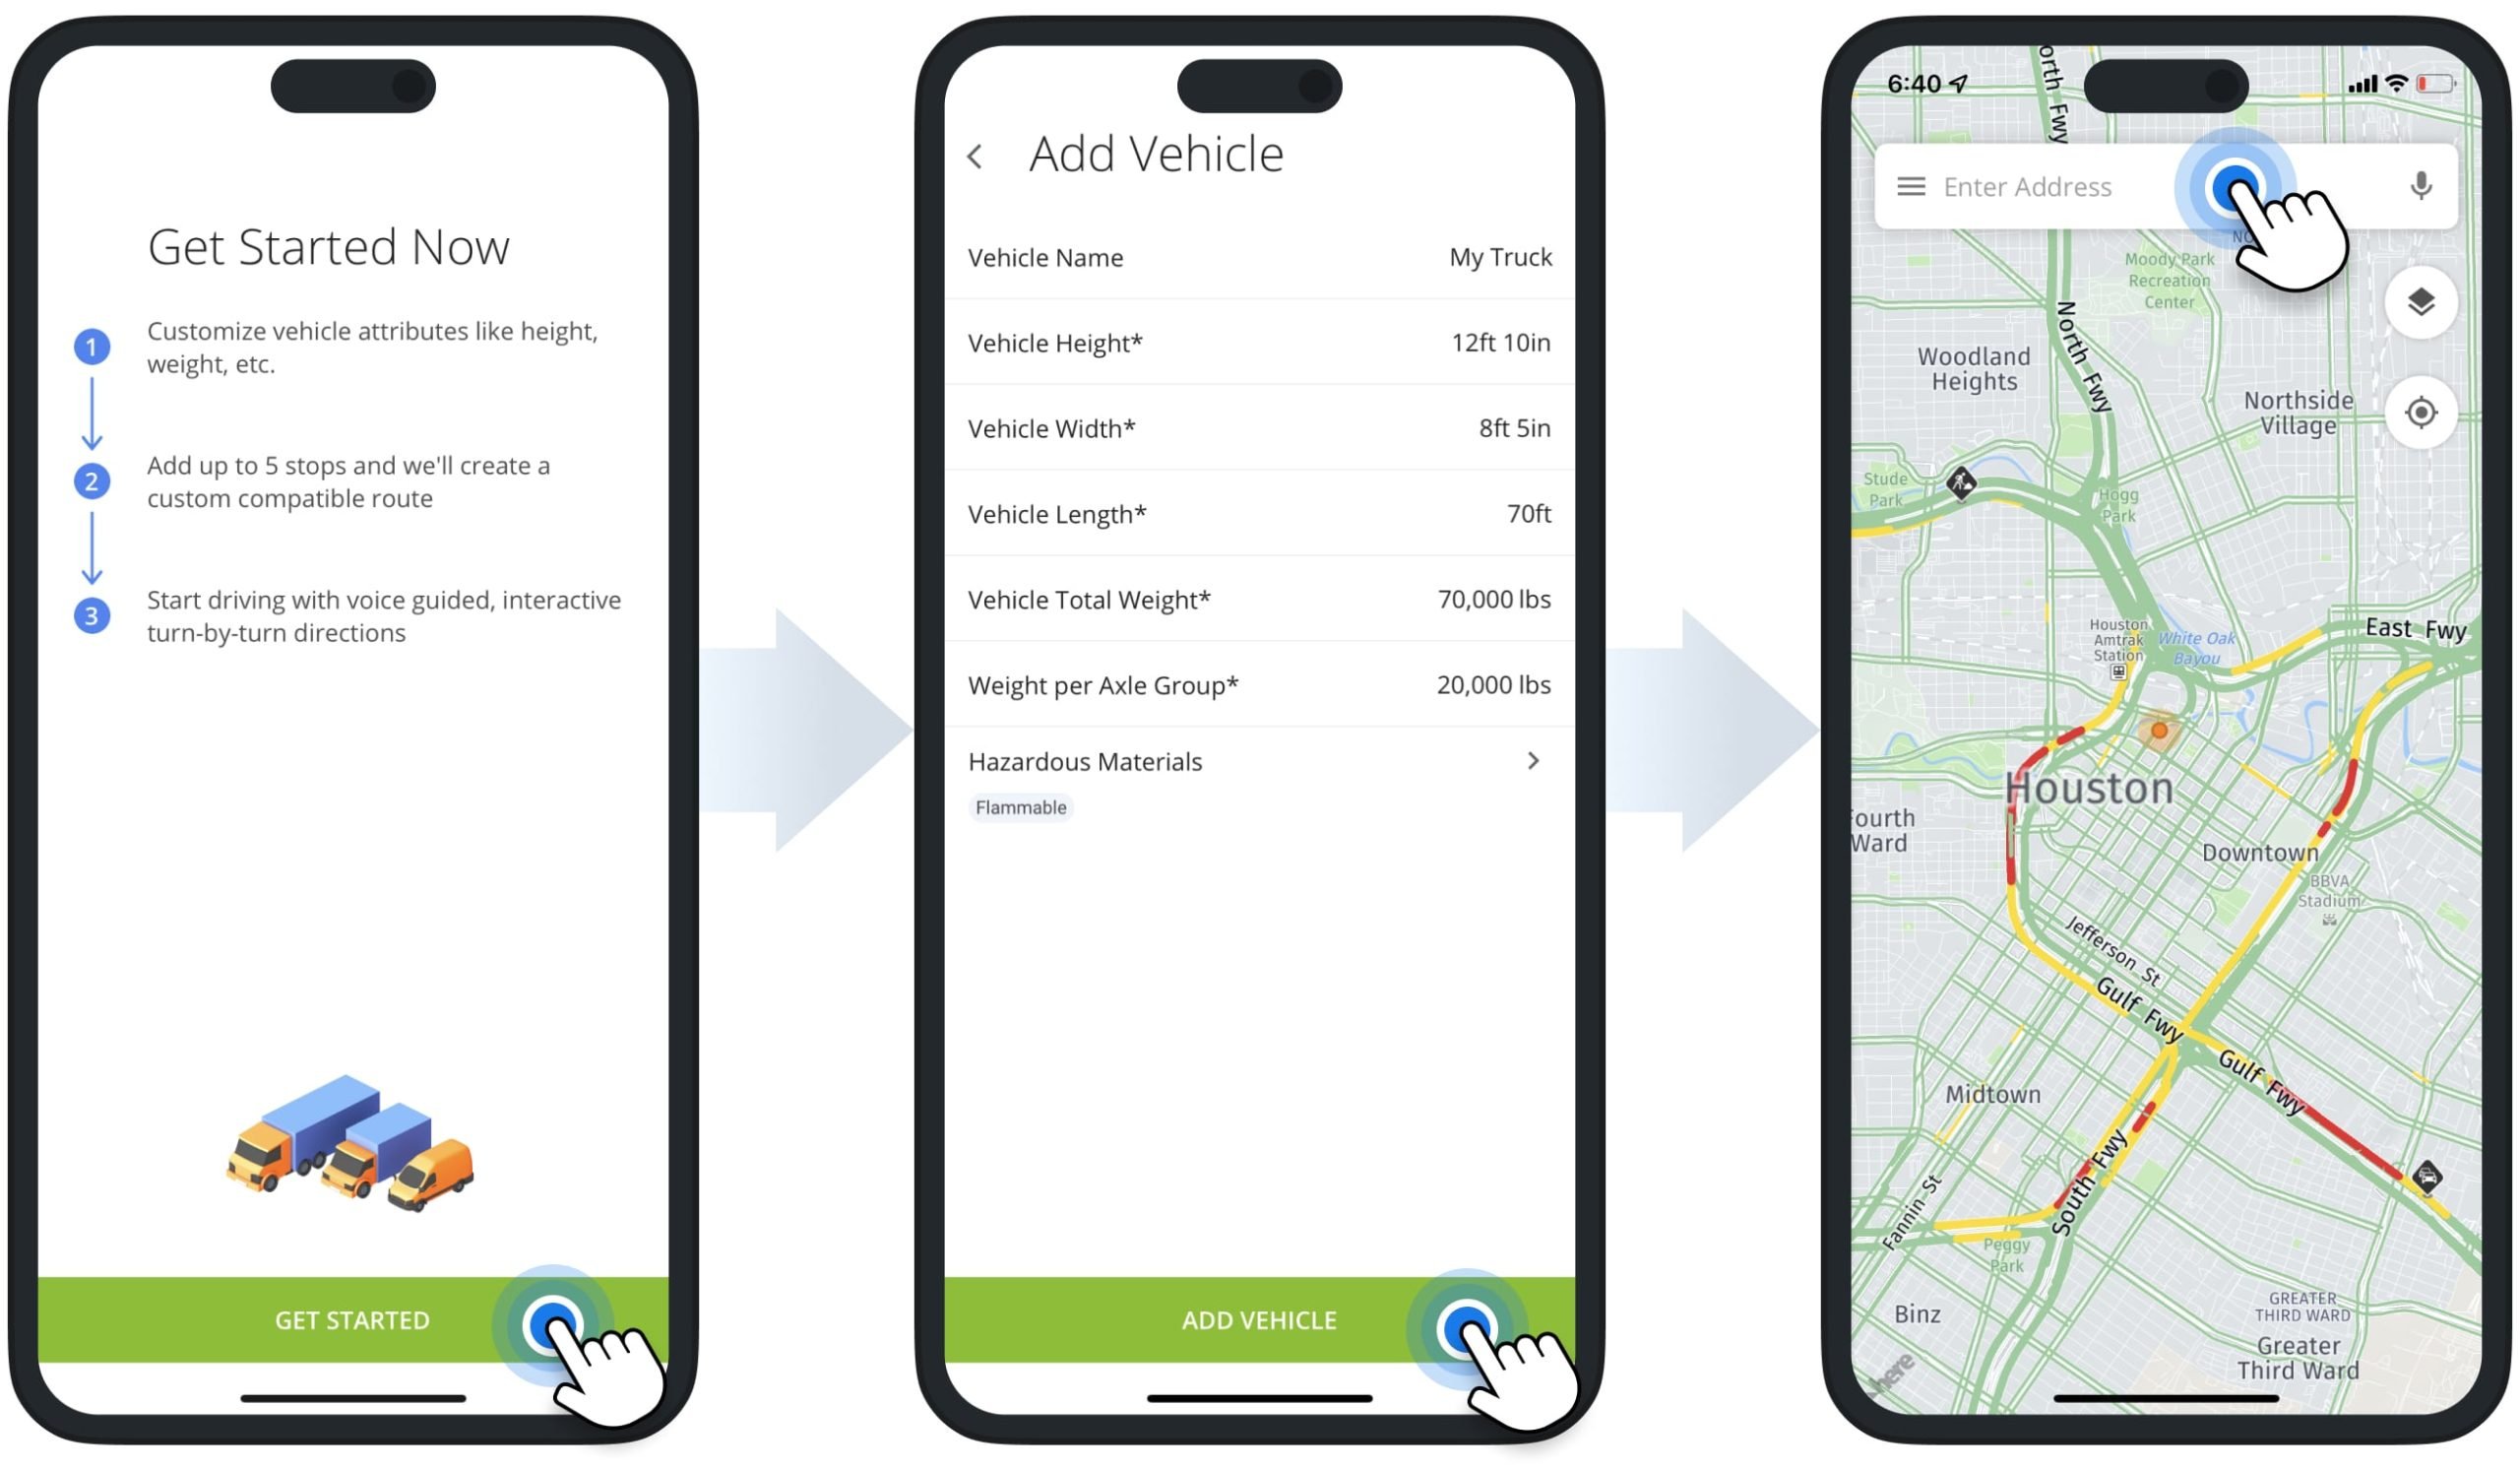 Set up the Route4Trucks app and add commercial vehicle parameters for truck route planning.